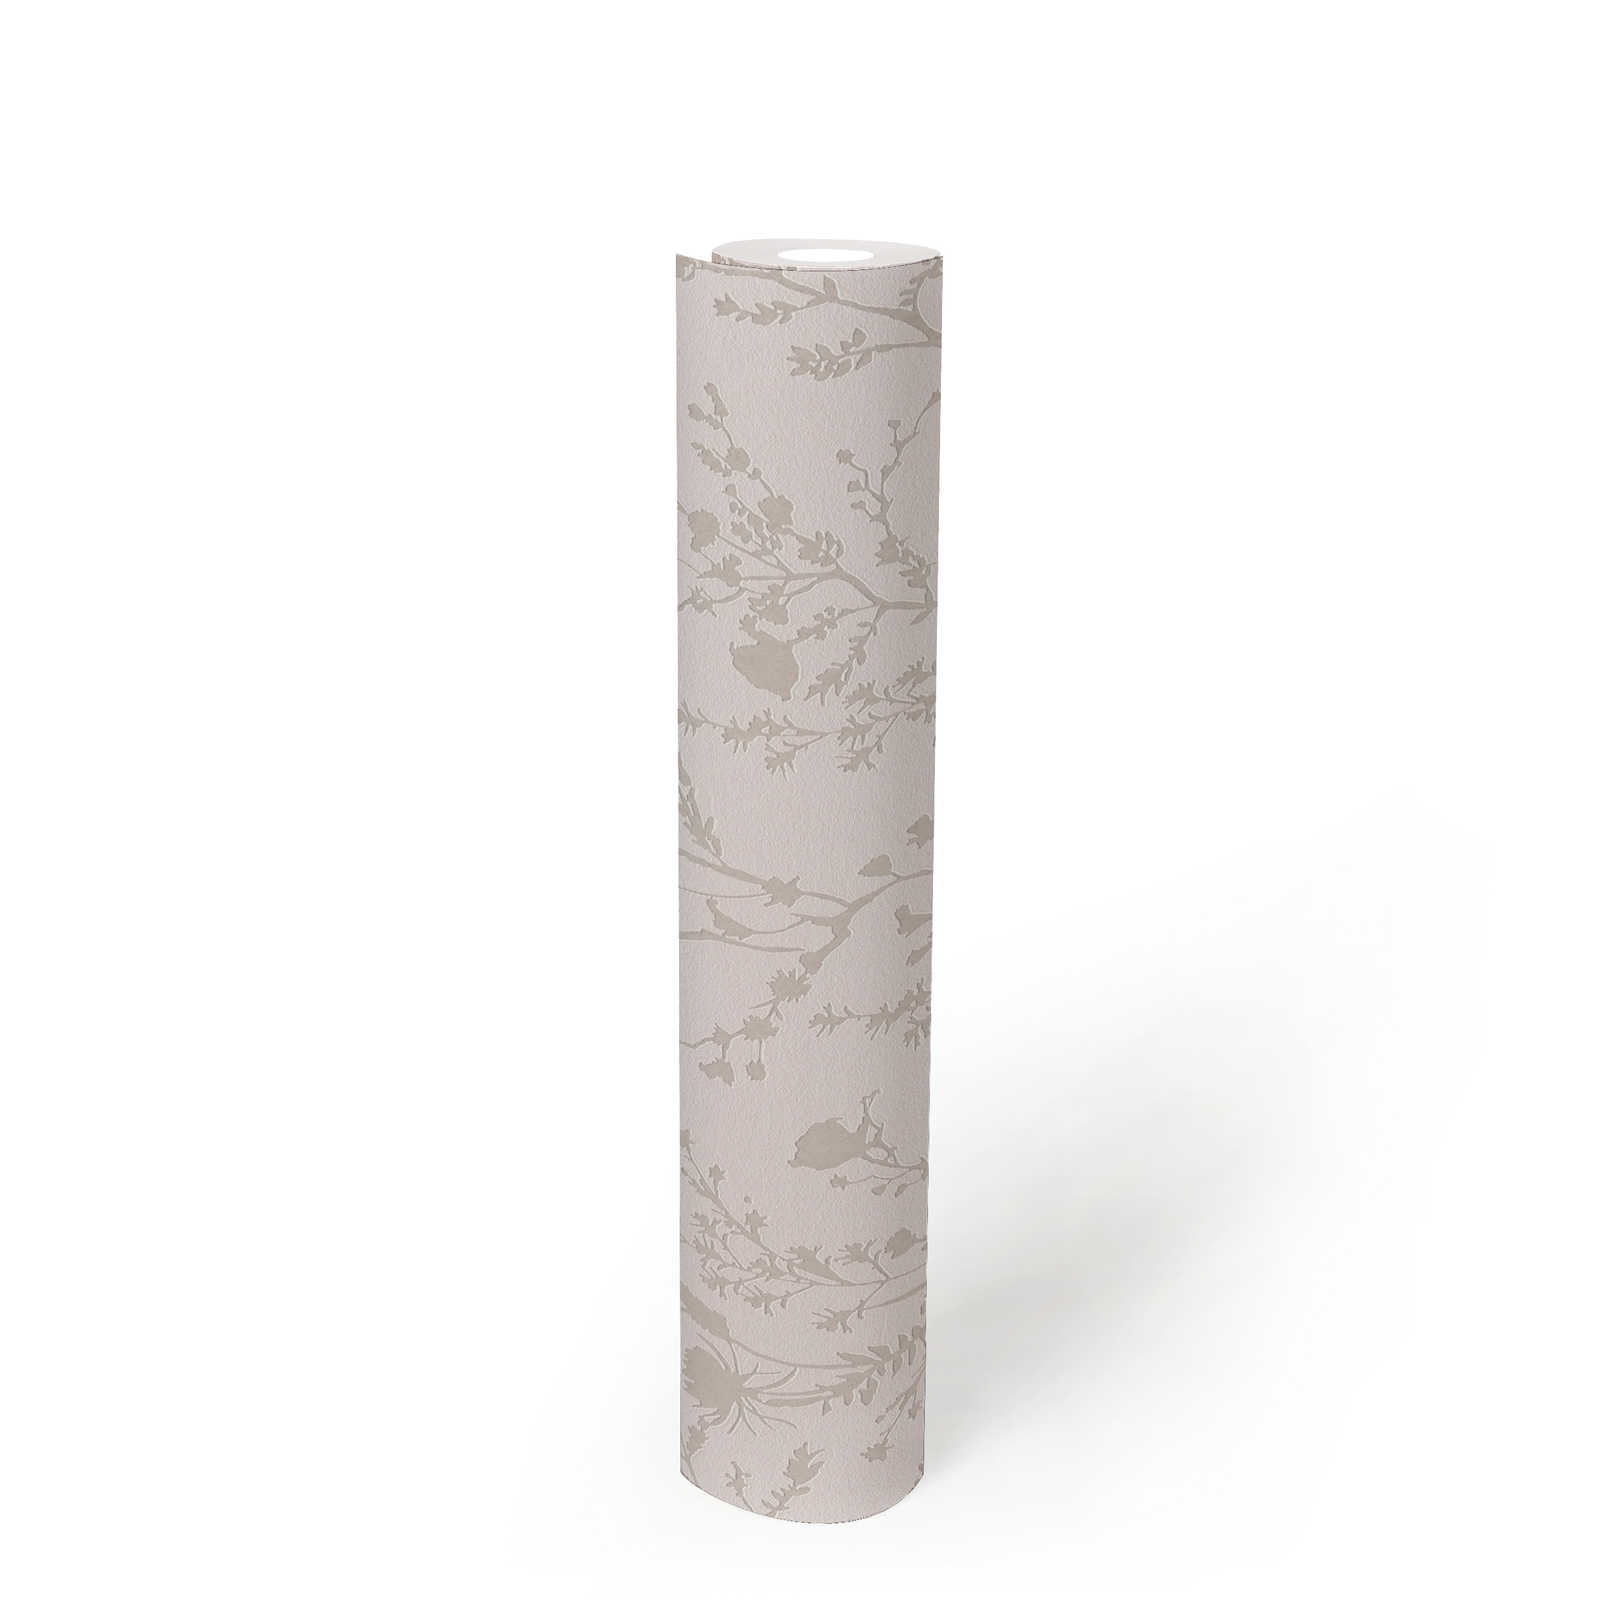             Floral non-woven wallpaper with a playful floral pattern - light pink, light grey
        